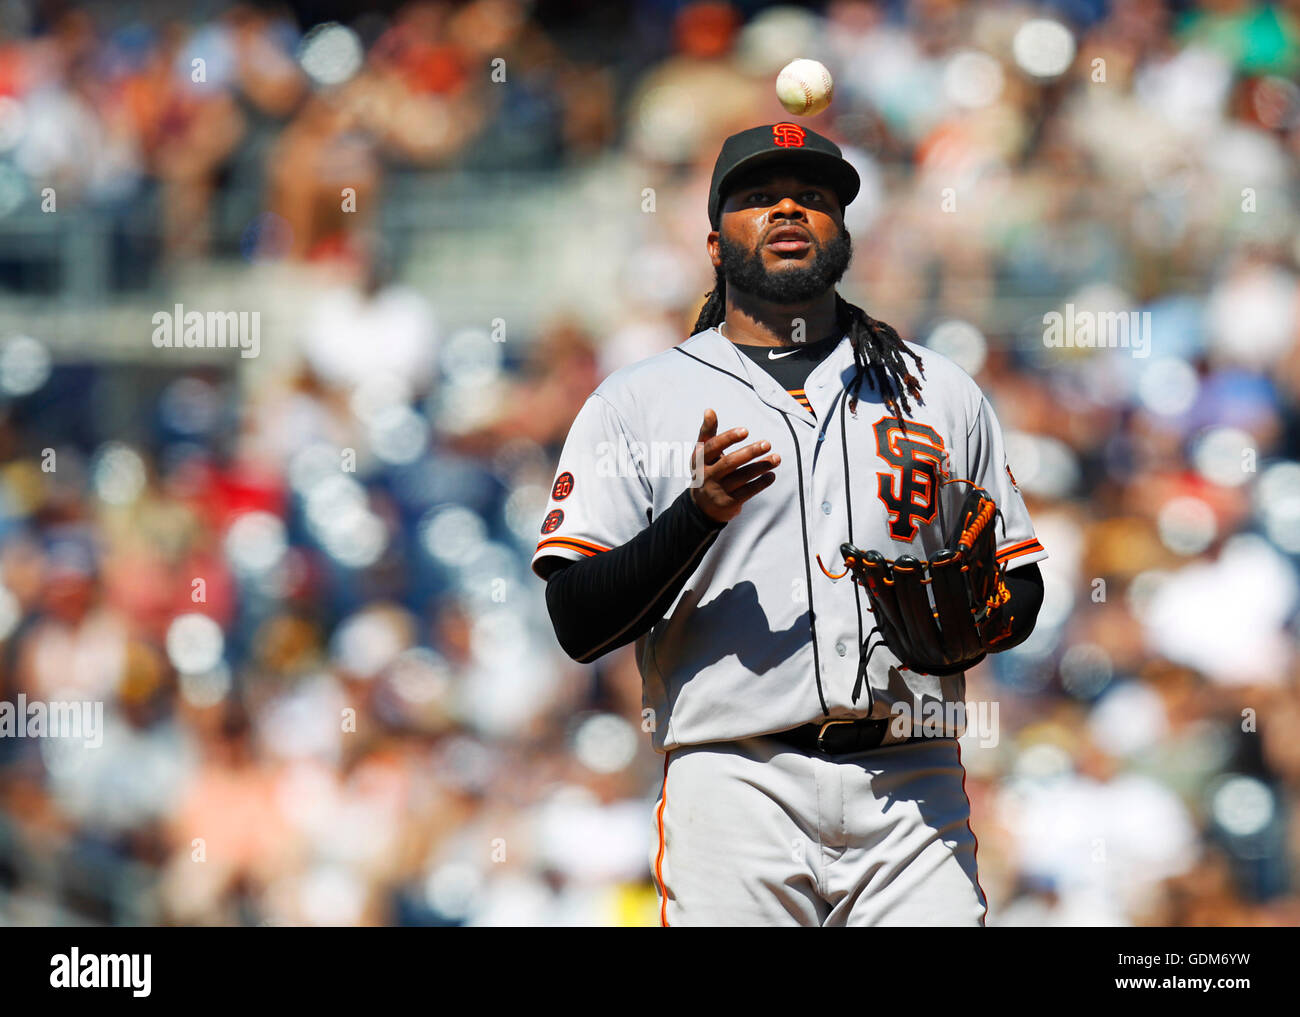 San Diego, CA, USA. 17th July, 2016. SAN DIEGO, CA - JULY 17, 2016 - | San Francisco Giants pitcher Johnny Cueto tosses the ball before being pulled in the 6th inning against the Padres. © K.C. Alfred/San Diego Union-Tribune/ZUMA Wire/Alamy Live News Stock Photo